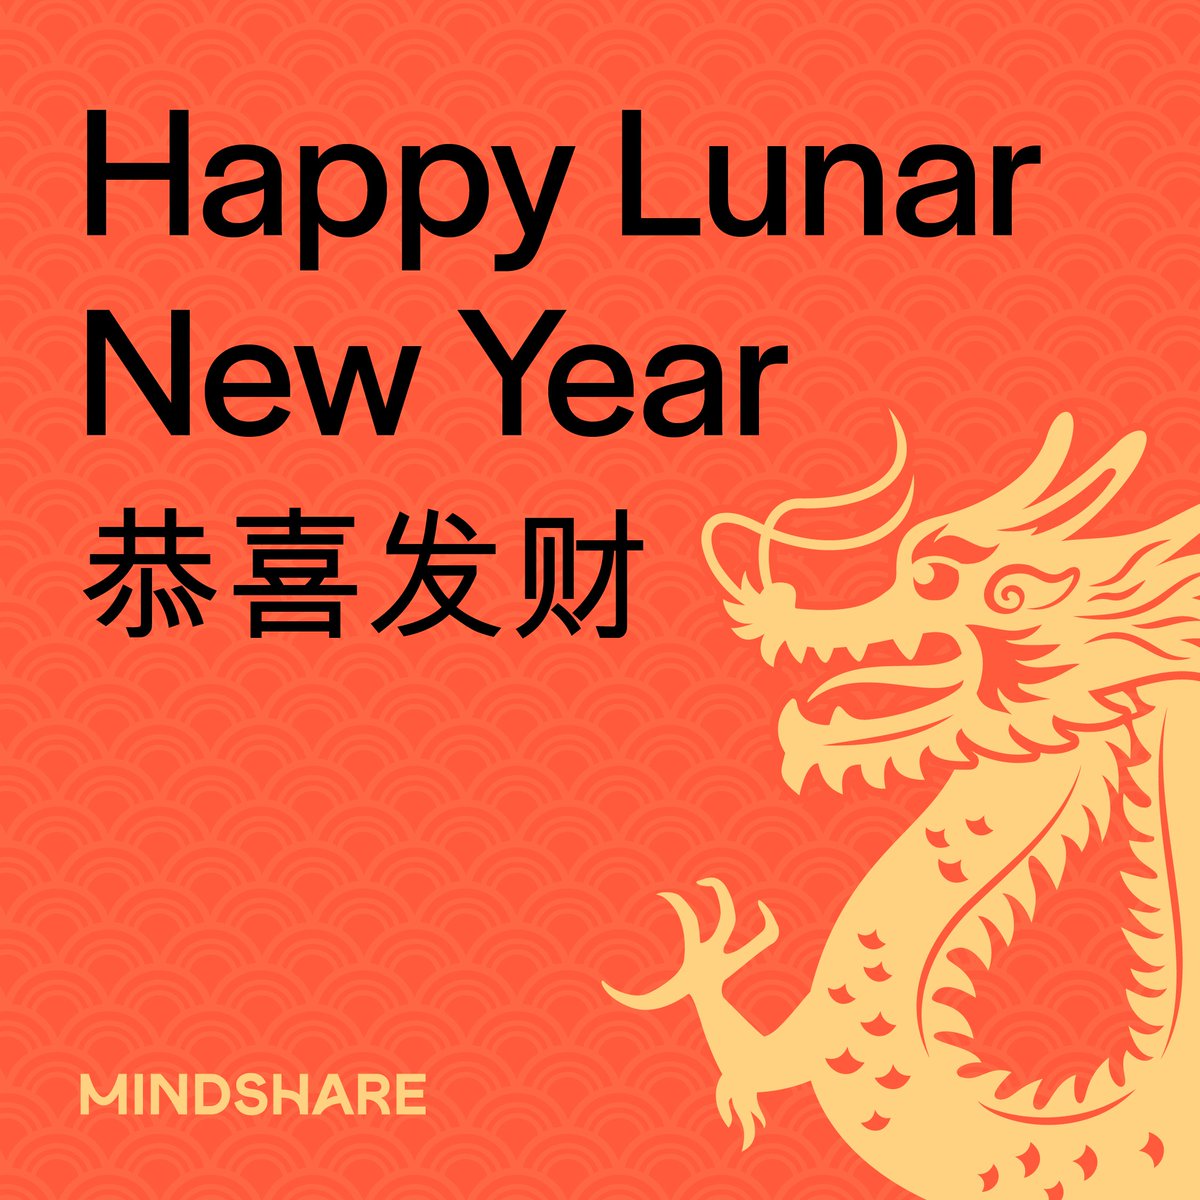 Happy Lunar New Year from all of us here at Mindshare! ✨ As we welcome in the Year of the Dragon, we wish you all a happy and prosperous year 🐉 恭喜发财! #TeamMindshare #LunarNewYear #Yearofthedragon